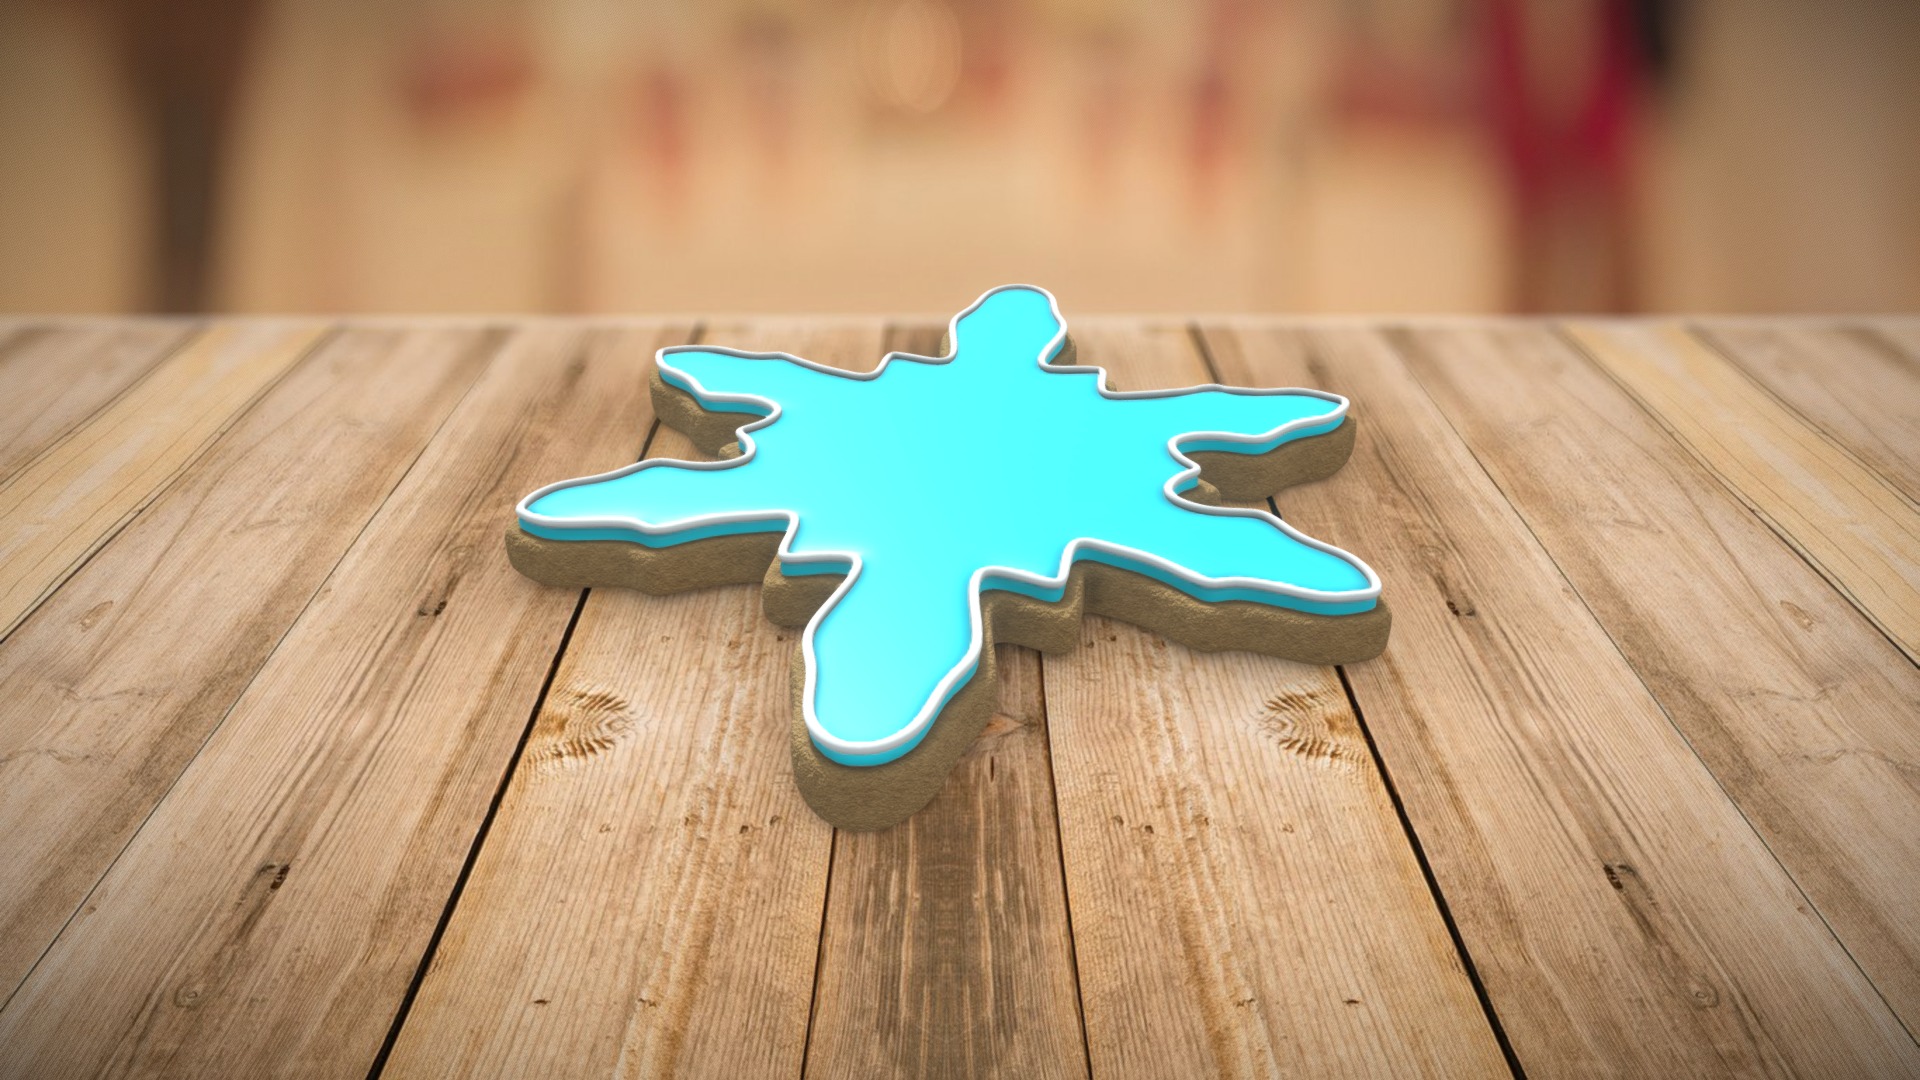 3D model Winter Snowflake Holiday Cookie Christmas Baking - This is a 3D model of the Winter Snowflake Holiday Cookie Christmas Baking. The 3D model is about a blue key on a wooden surface.